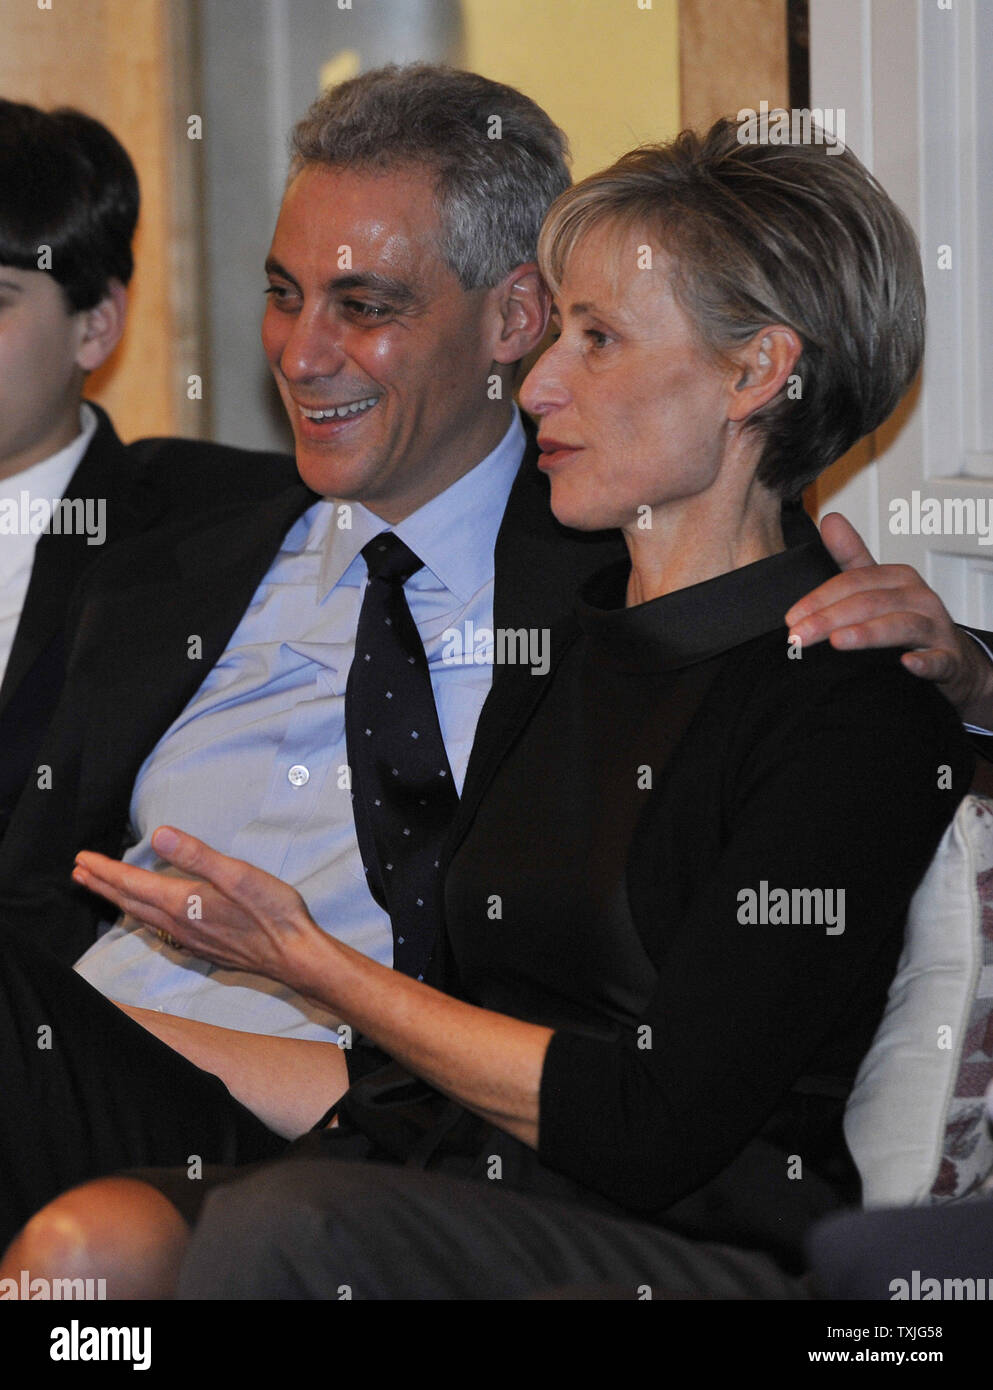 Chicago Mayoral candidate Rahm Emanuel (L) watches election returns with his wife Amy Rule before an election-night rally in Chicago on February 22, 2011.       UPI/Brian Kersey Stock Photo